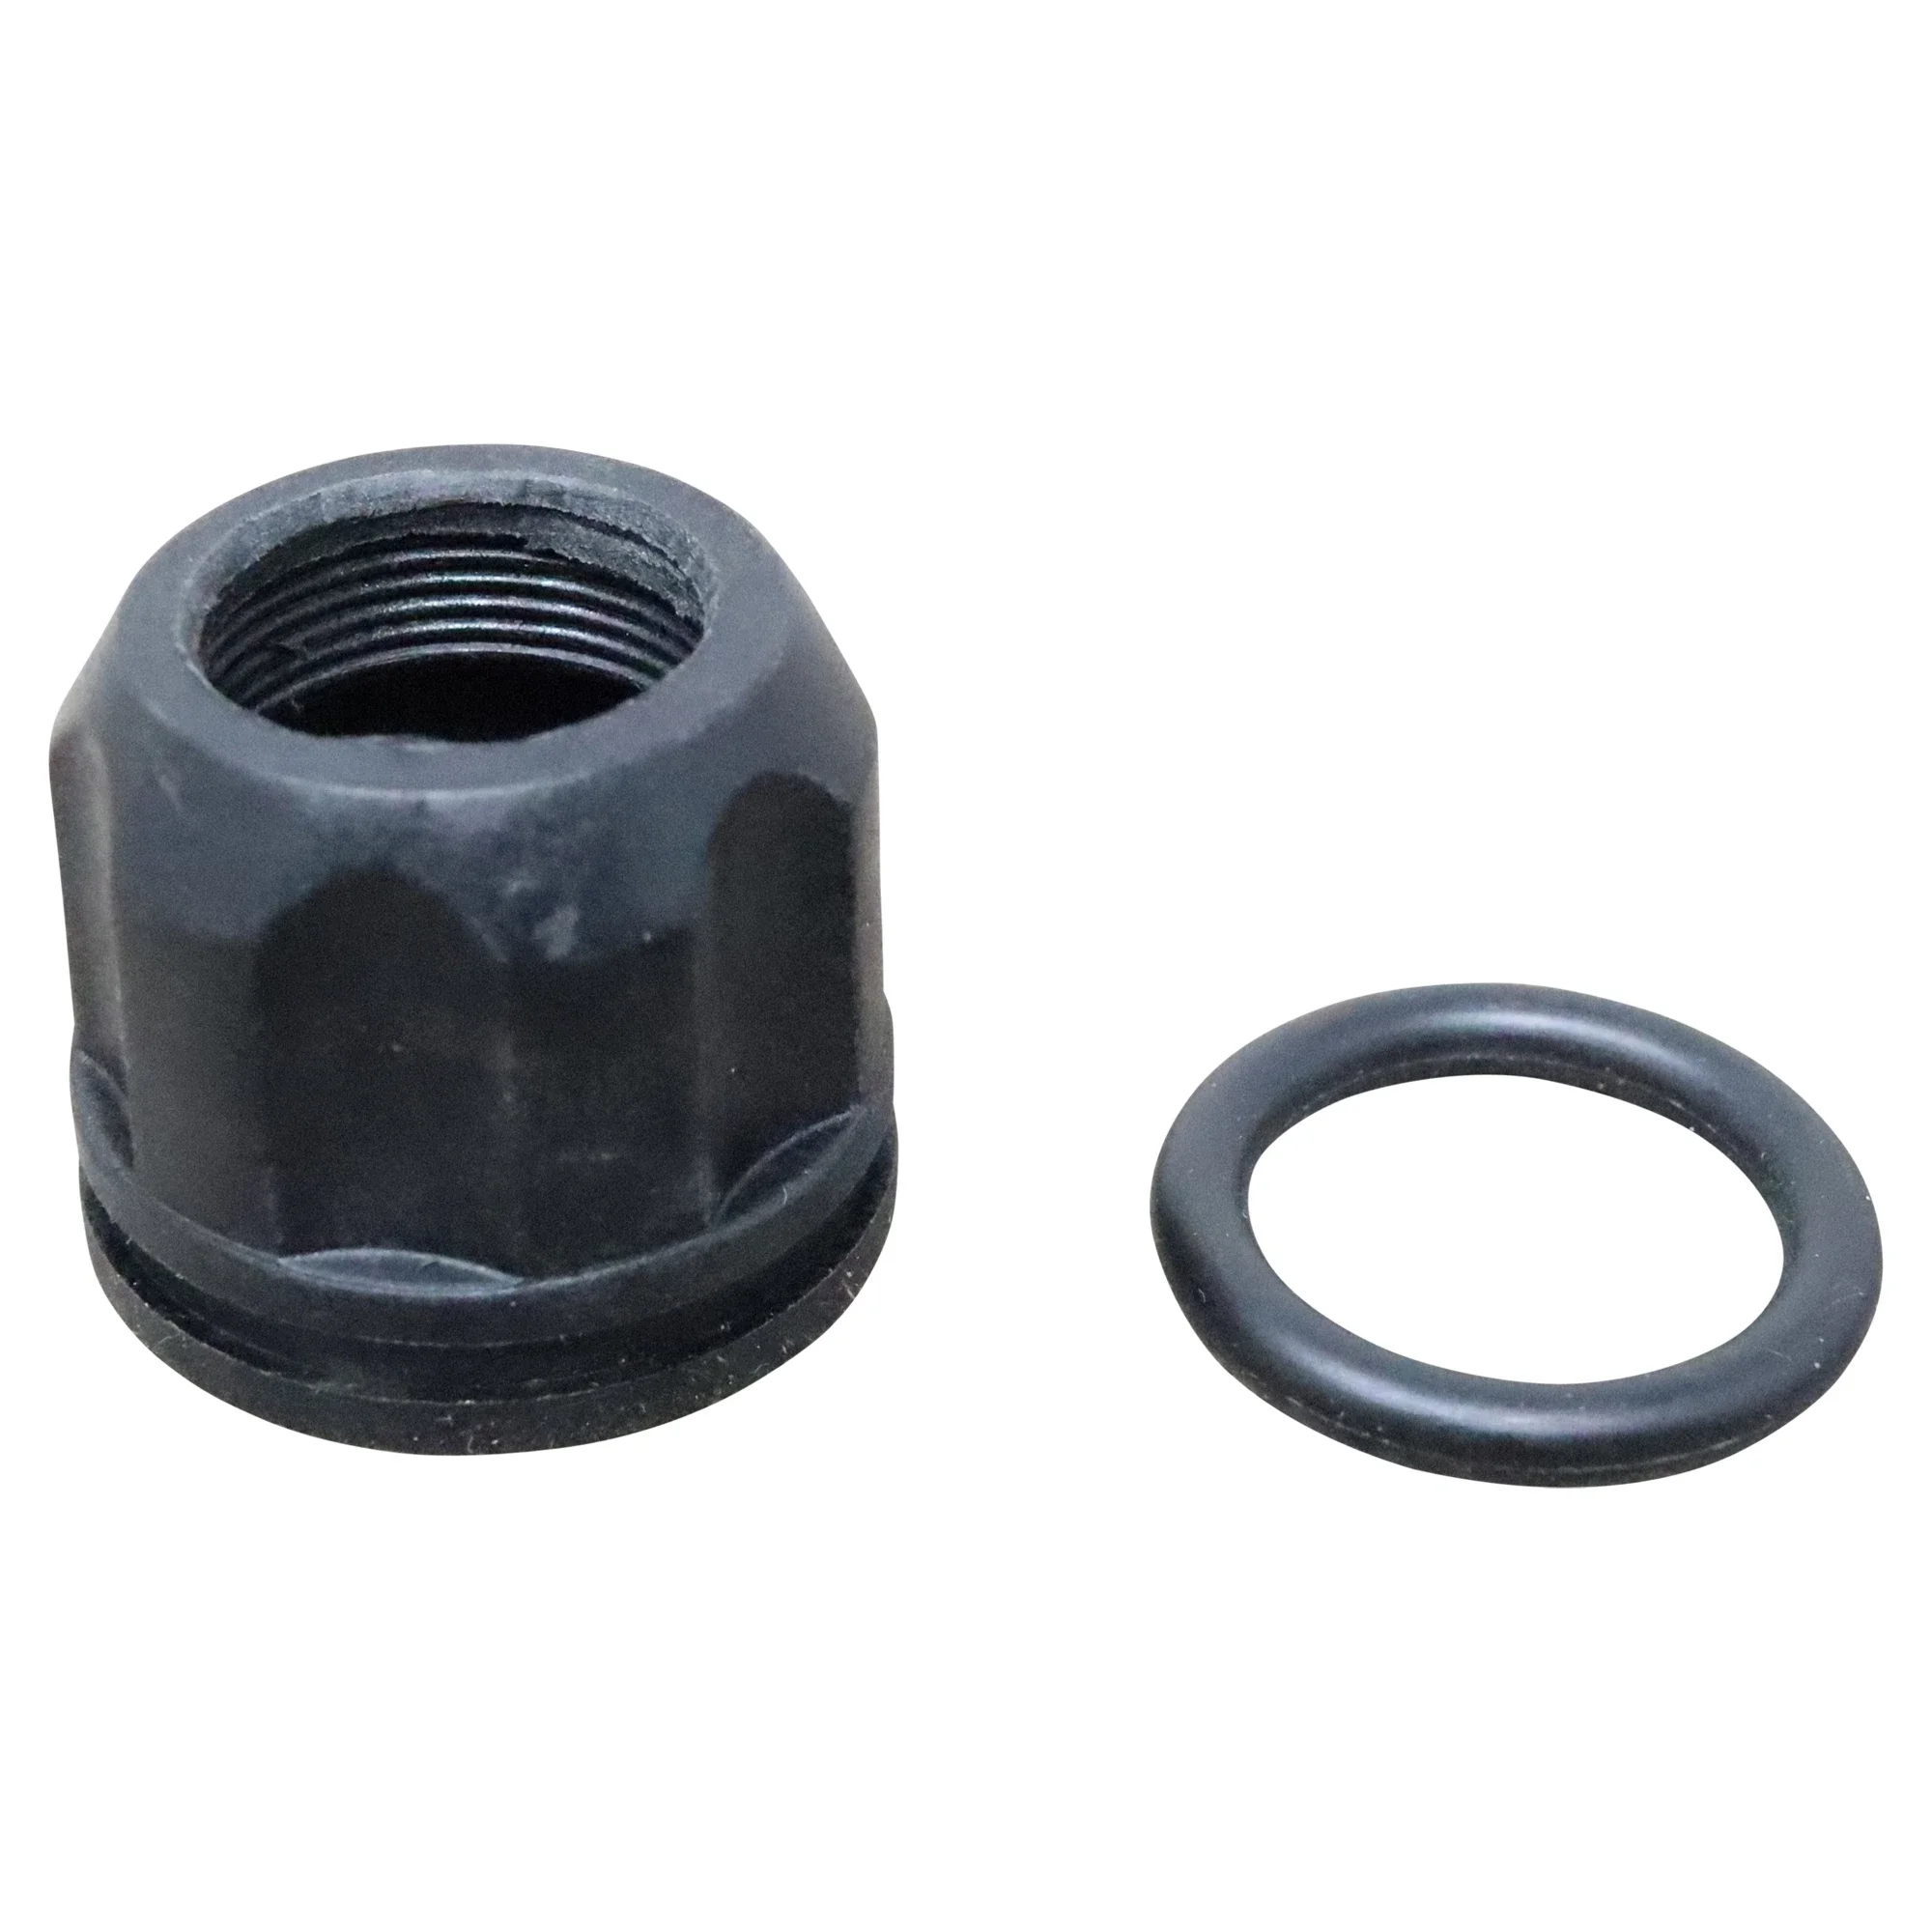 Wastebuilt® Replacement for Curotto-Can Coil Nut S16-0565